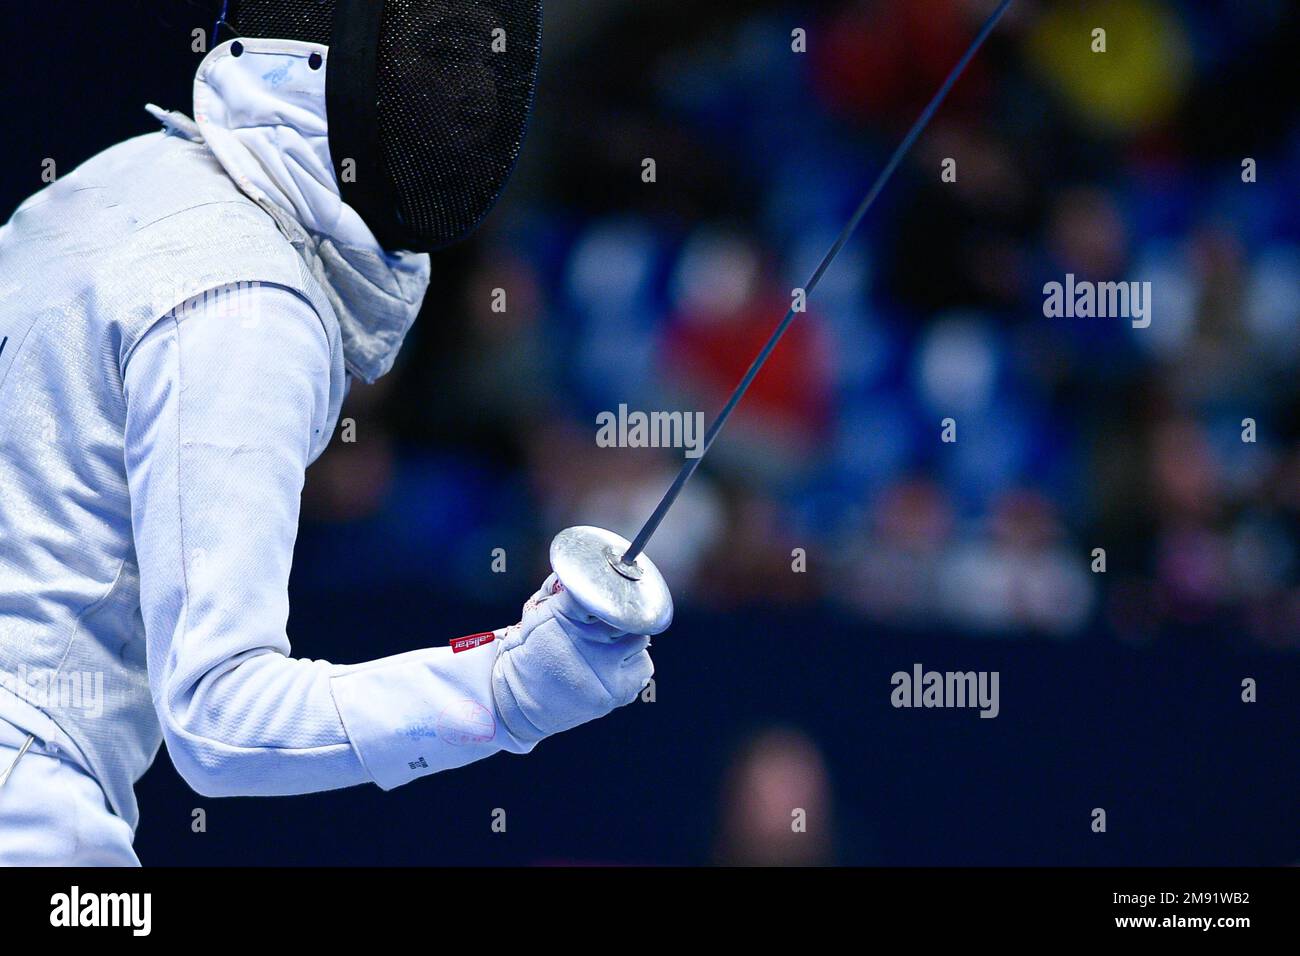 Close-up illustration during the Mazars Challenge International of Fencing (foil) at Stade Pierre de Coubertin on January 14, 2023 in Paris, France. Stock Photo